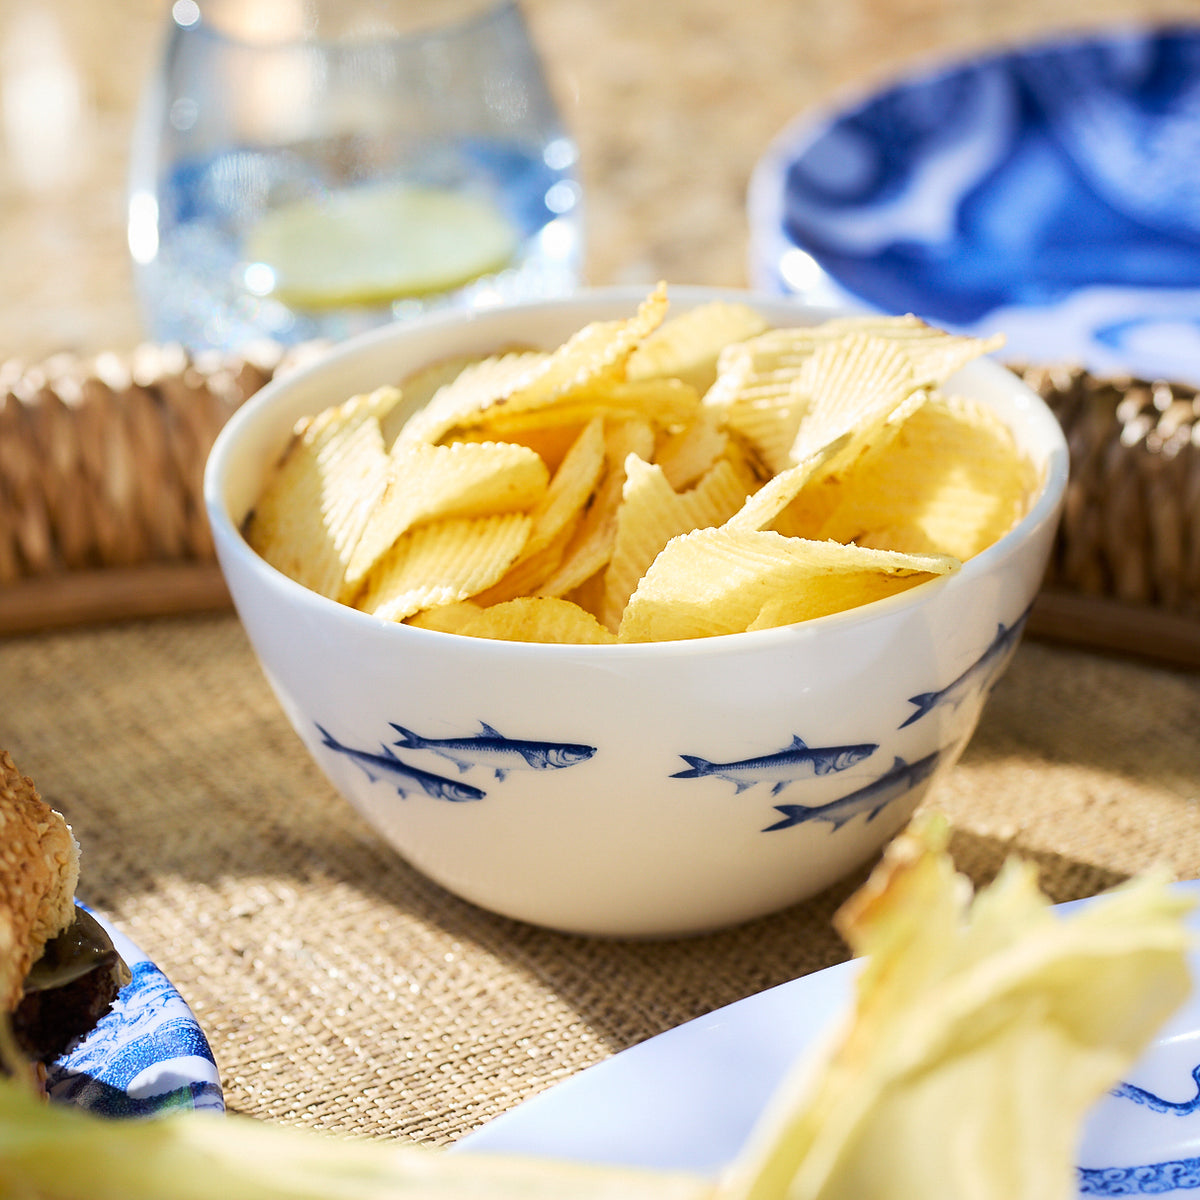 A Caskata School of Fish Cereal Bowl, adorned with a school of fish design, is filled with ridged potato chips, placed on a woven placemat next to plates and a glass of water with lemon.